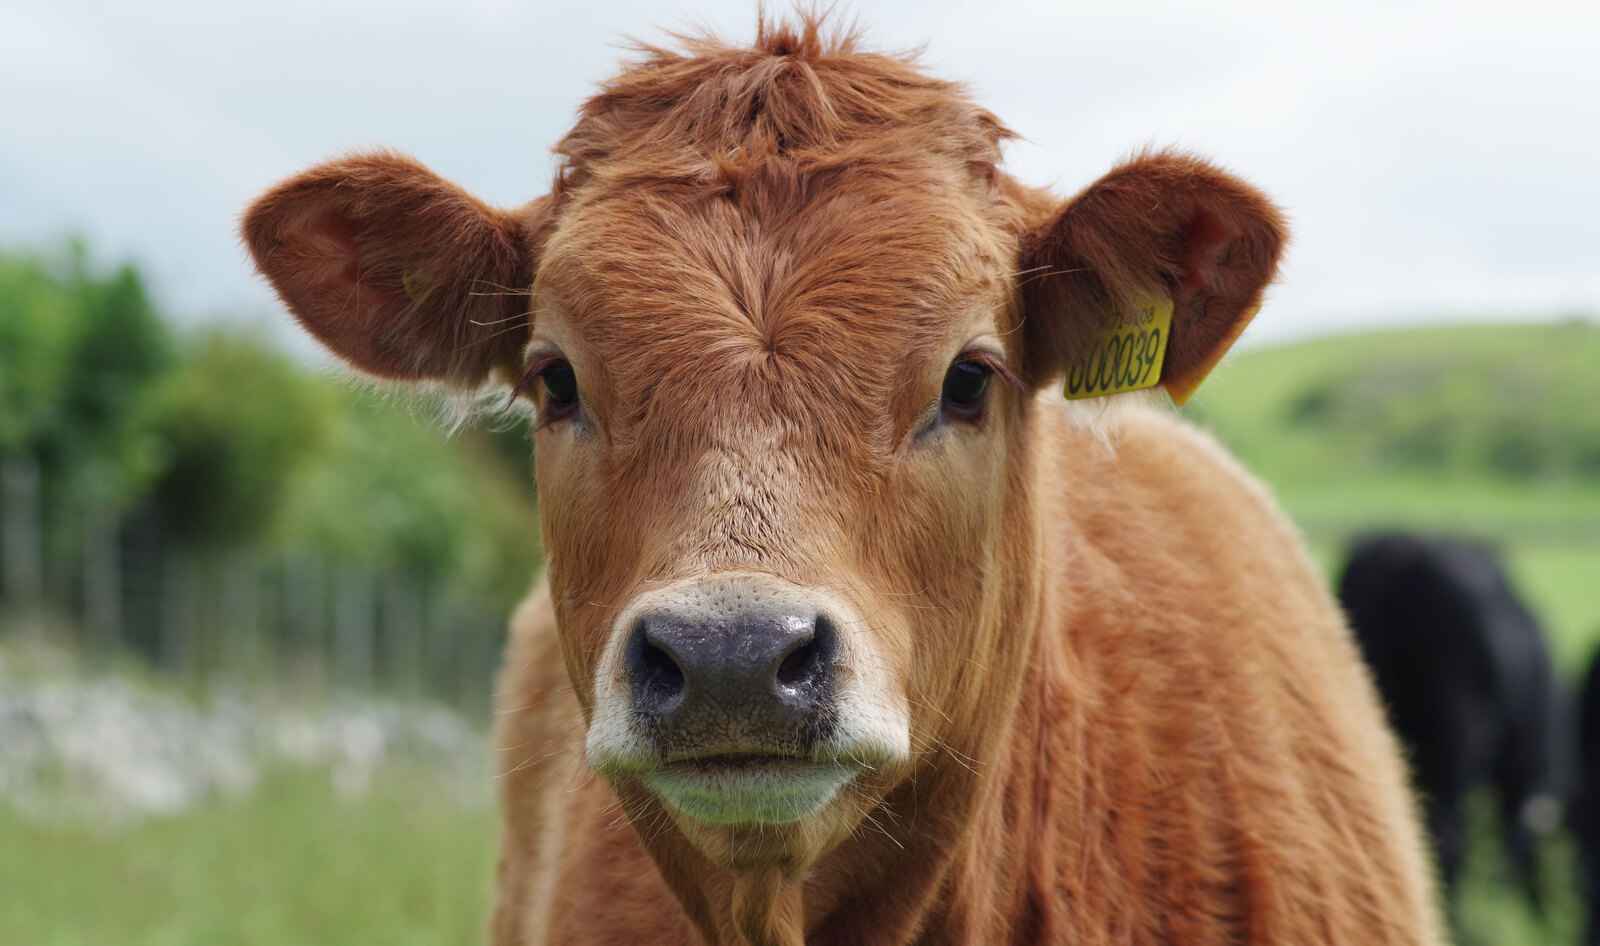 Popularity of Impossible Foods and Beyond Meat Is Saving 250,000 Animals Annually